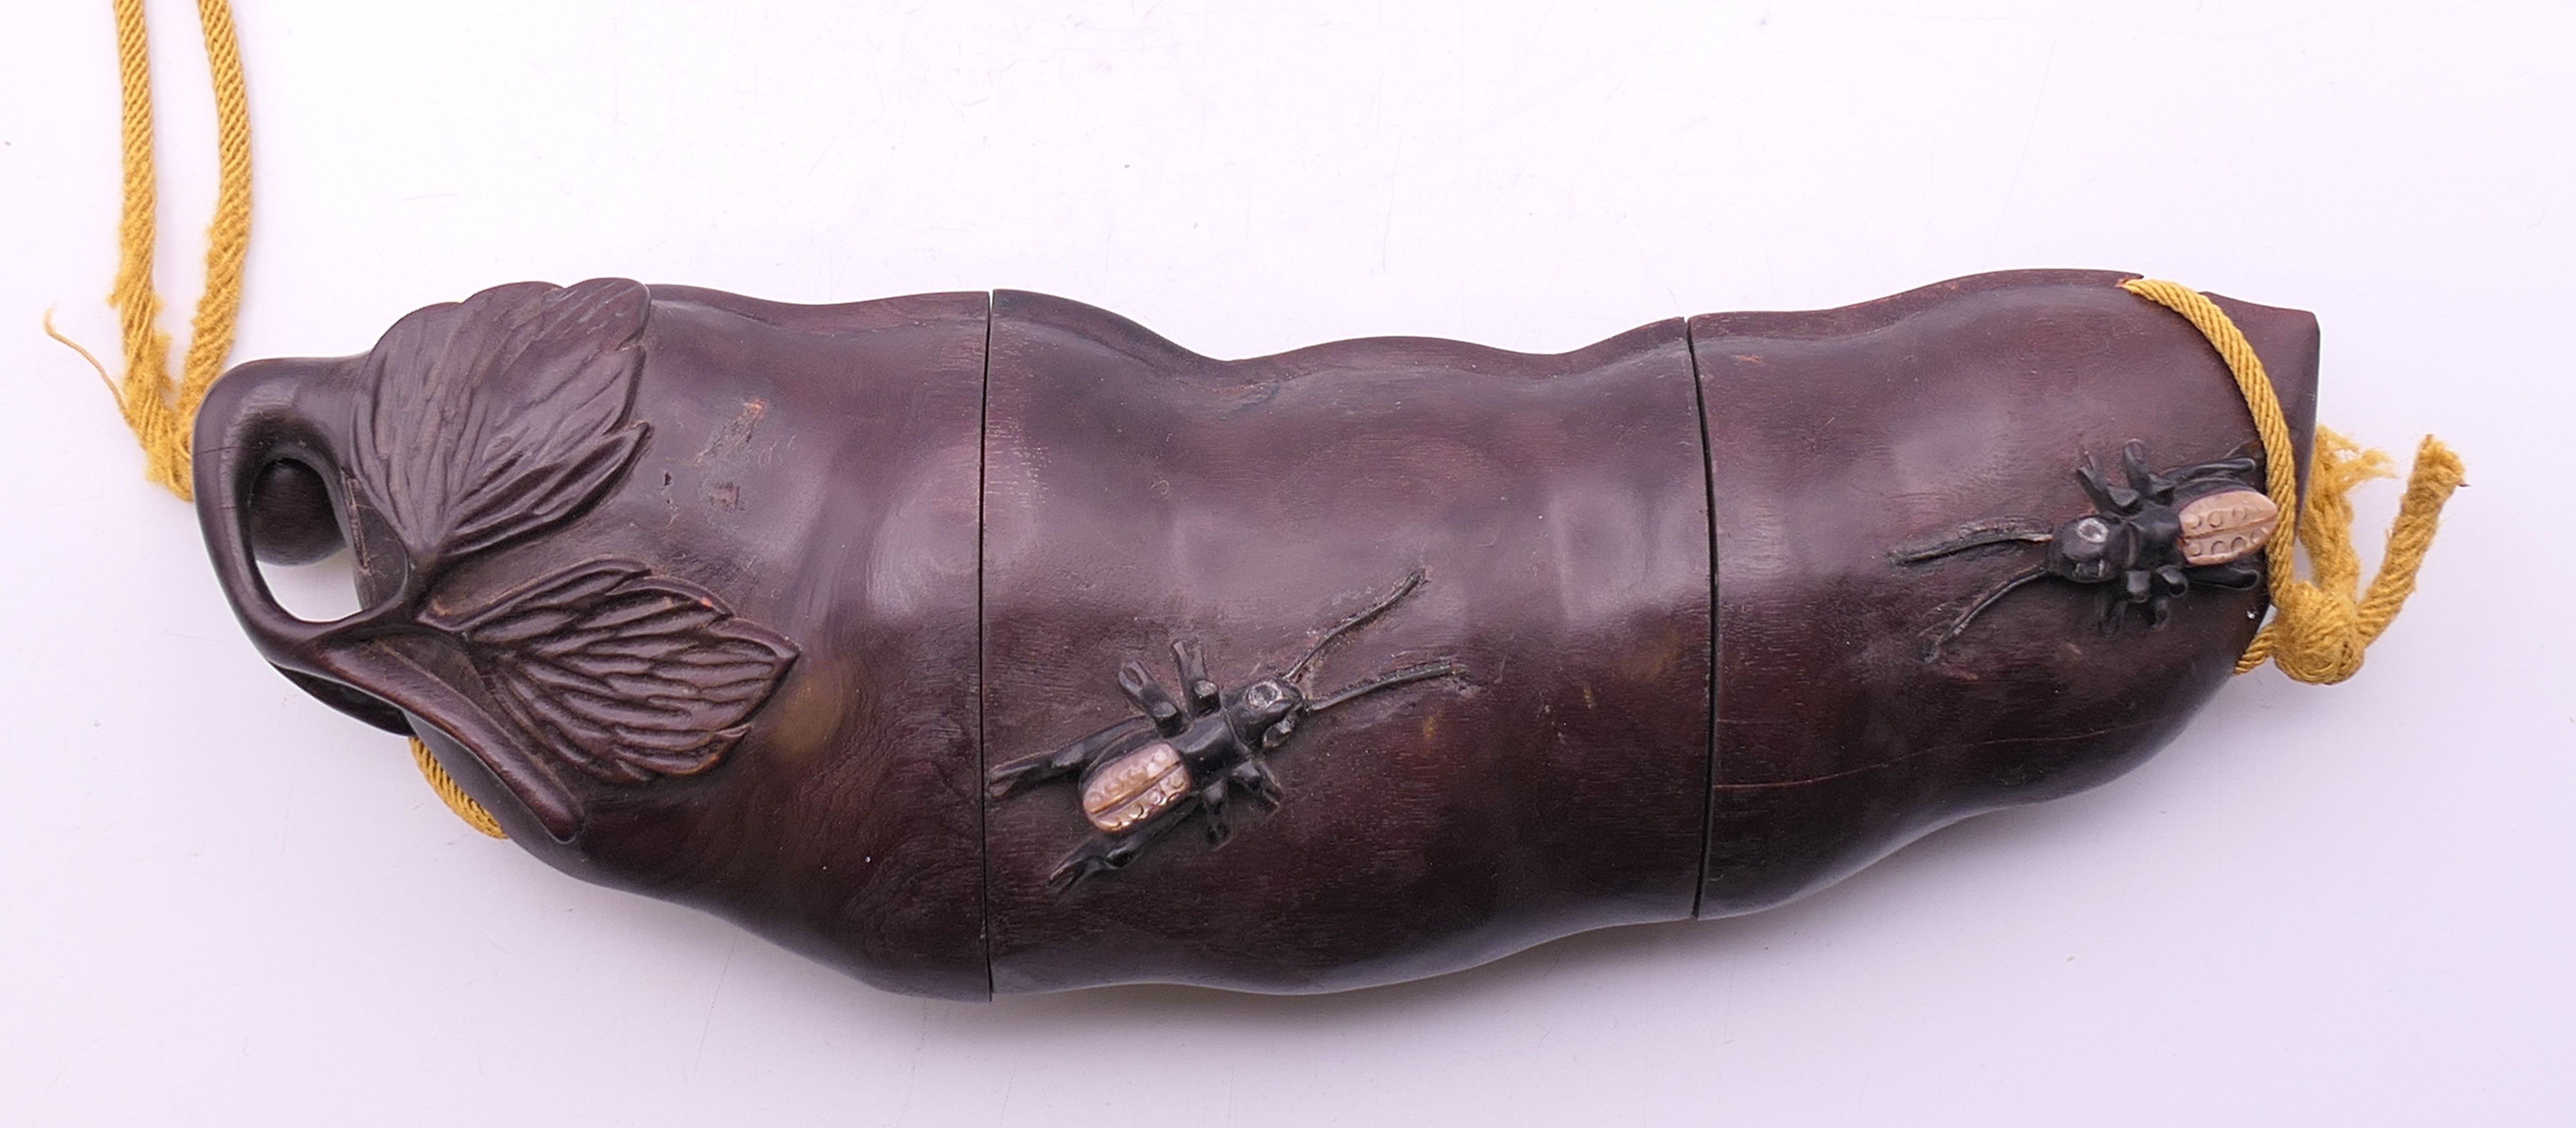 An inro formed as an insect on fruit. 17.5 cm long. - Image 3 of 5